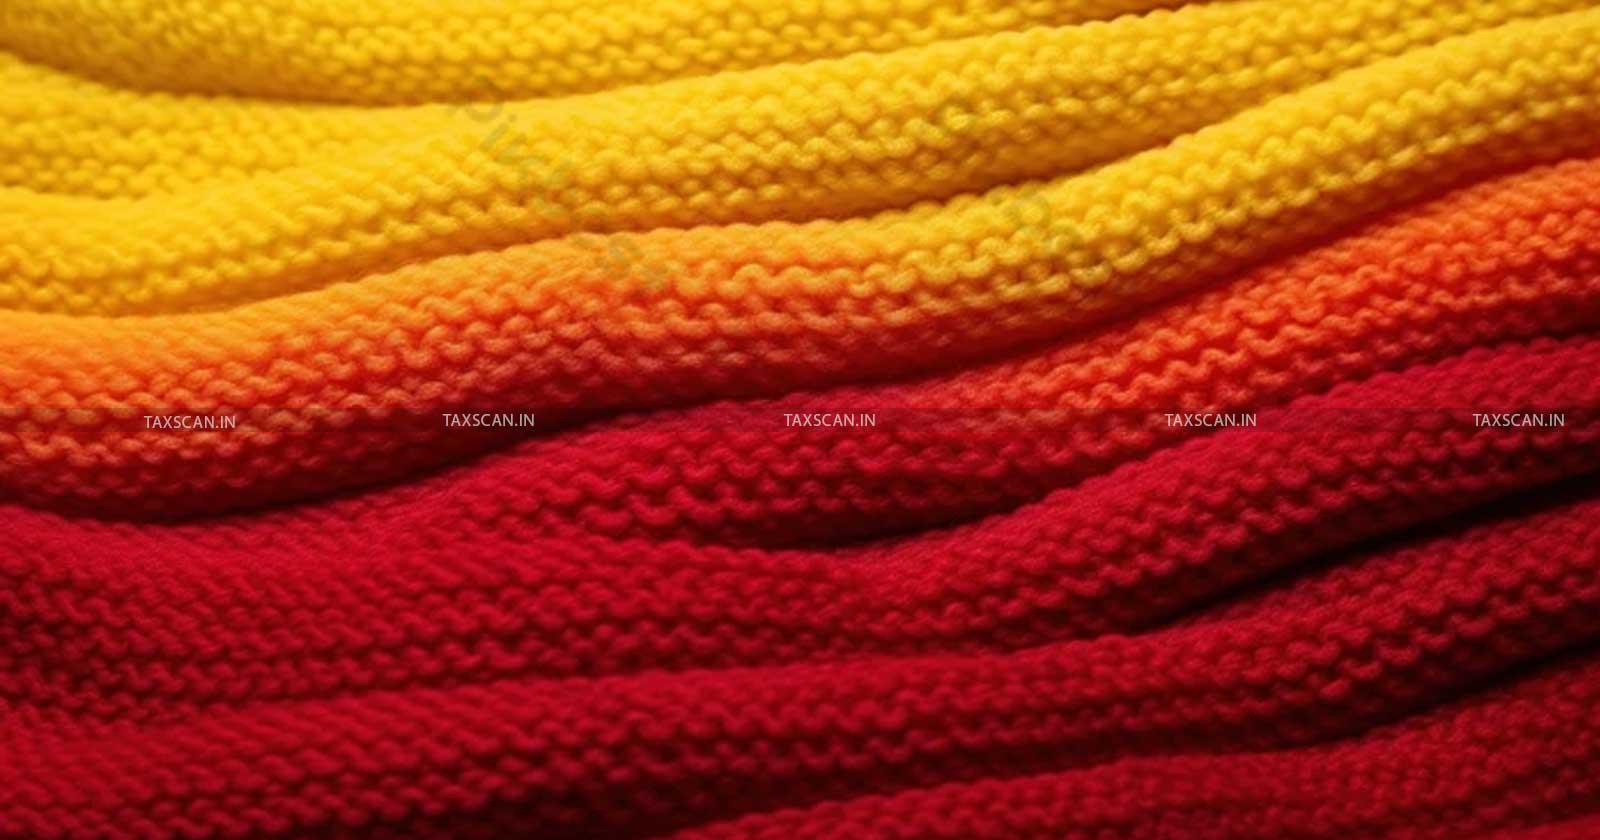 CBIC - Import - Minimum Import Price - Synthetic Knitted Fabrics - TAXSCAN